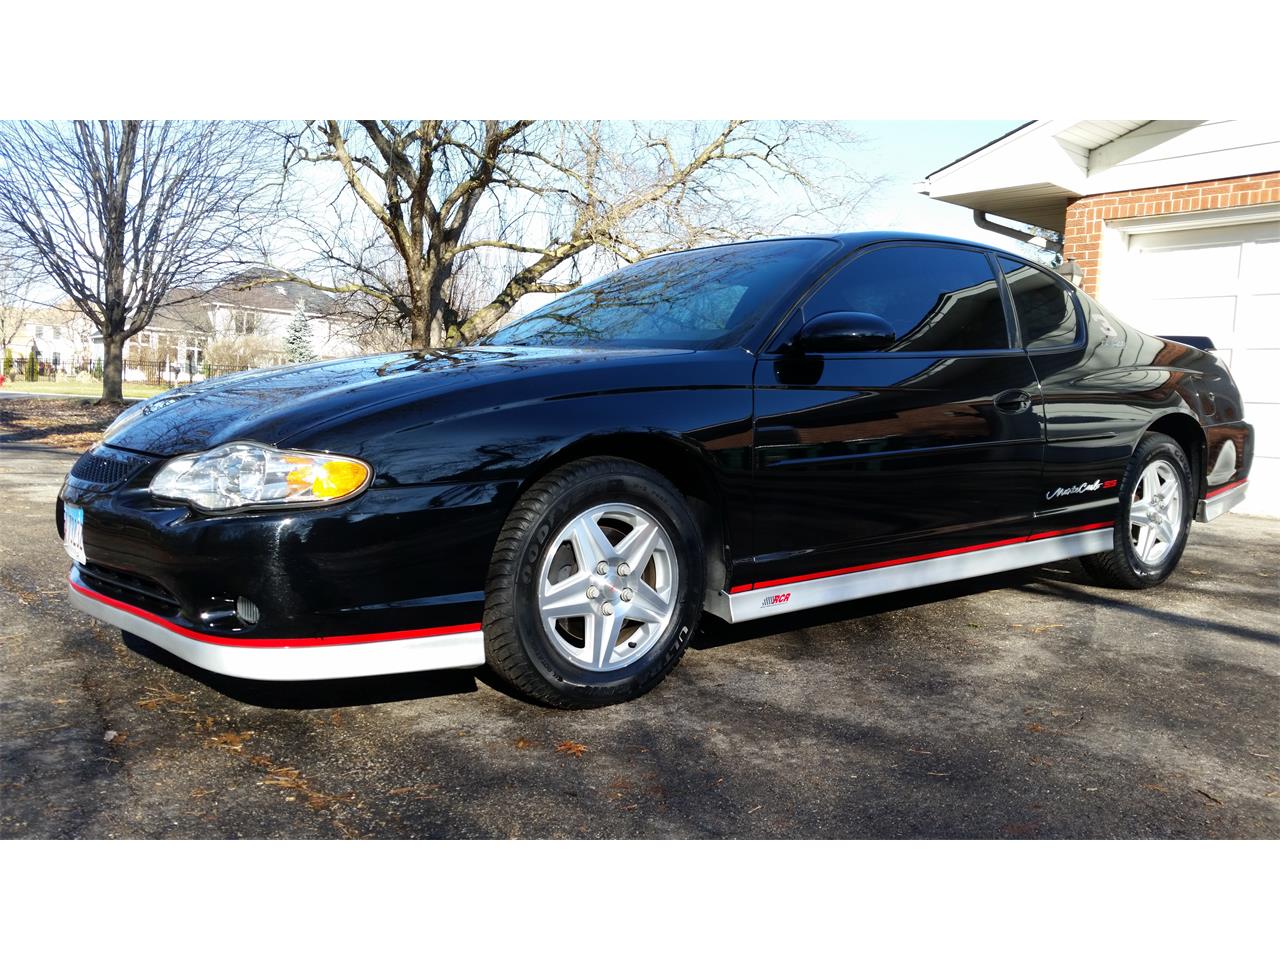 2002 Chevrolet Monte Carlo Ss Intimidator For Sale